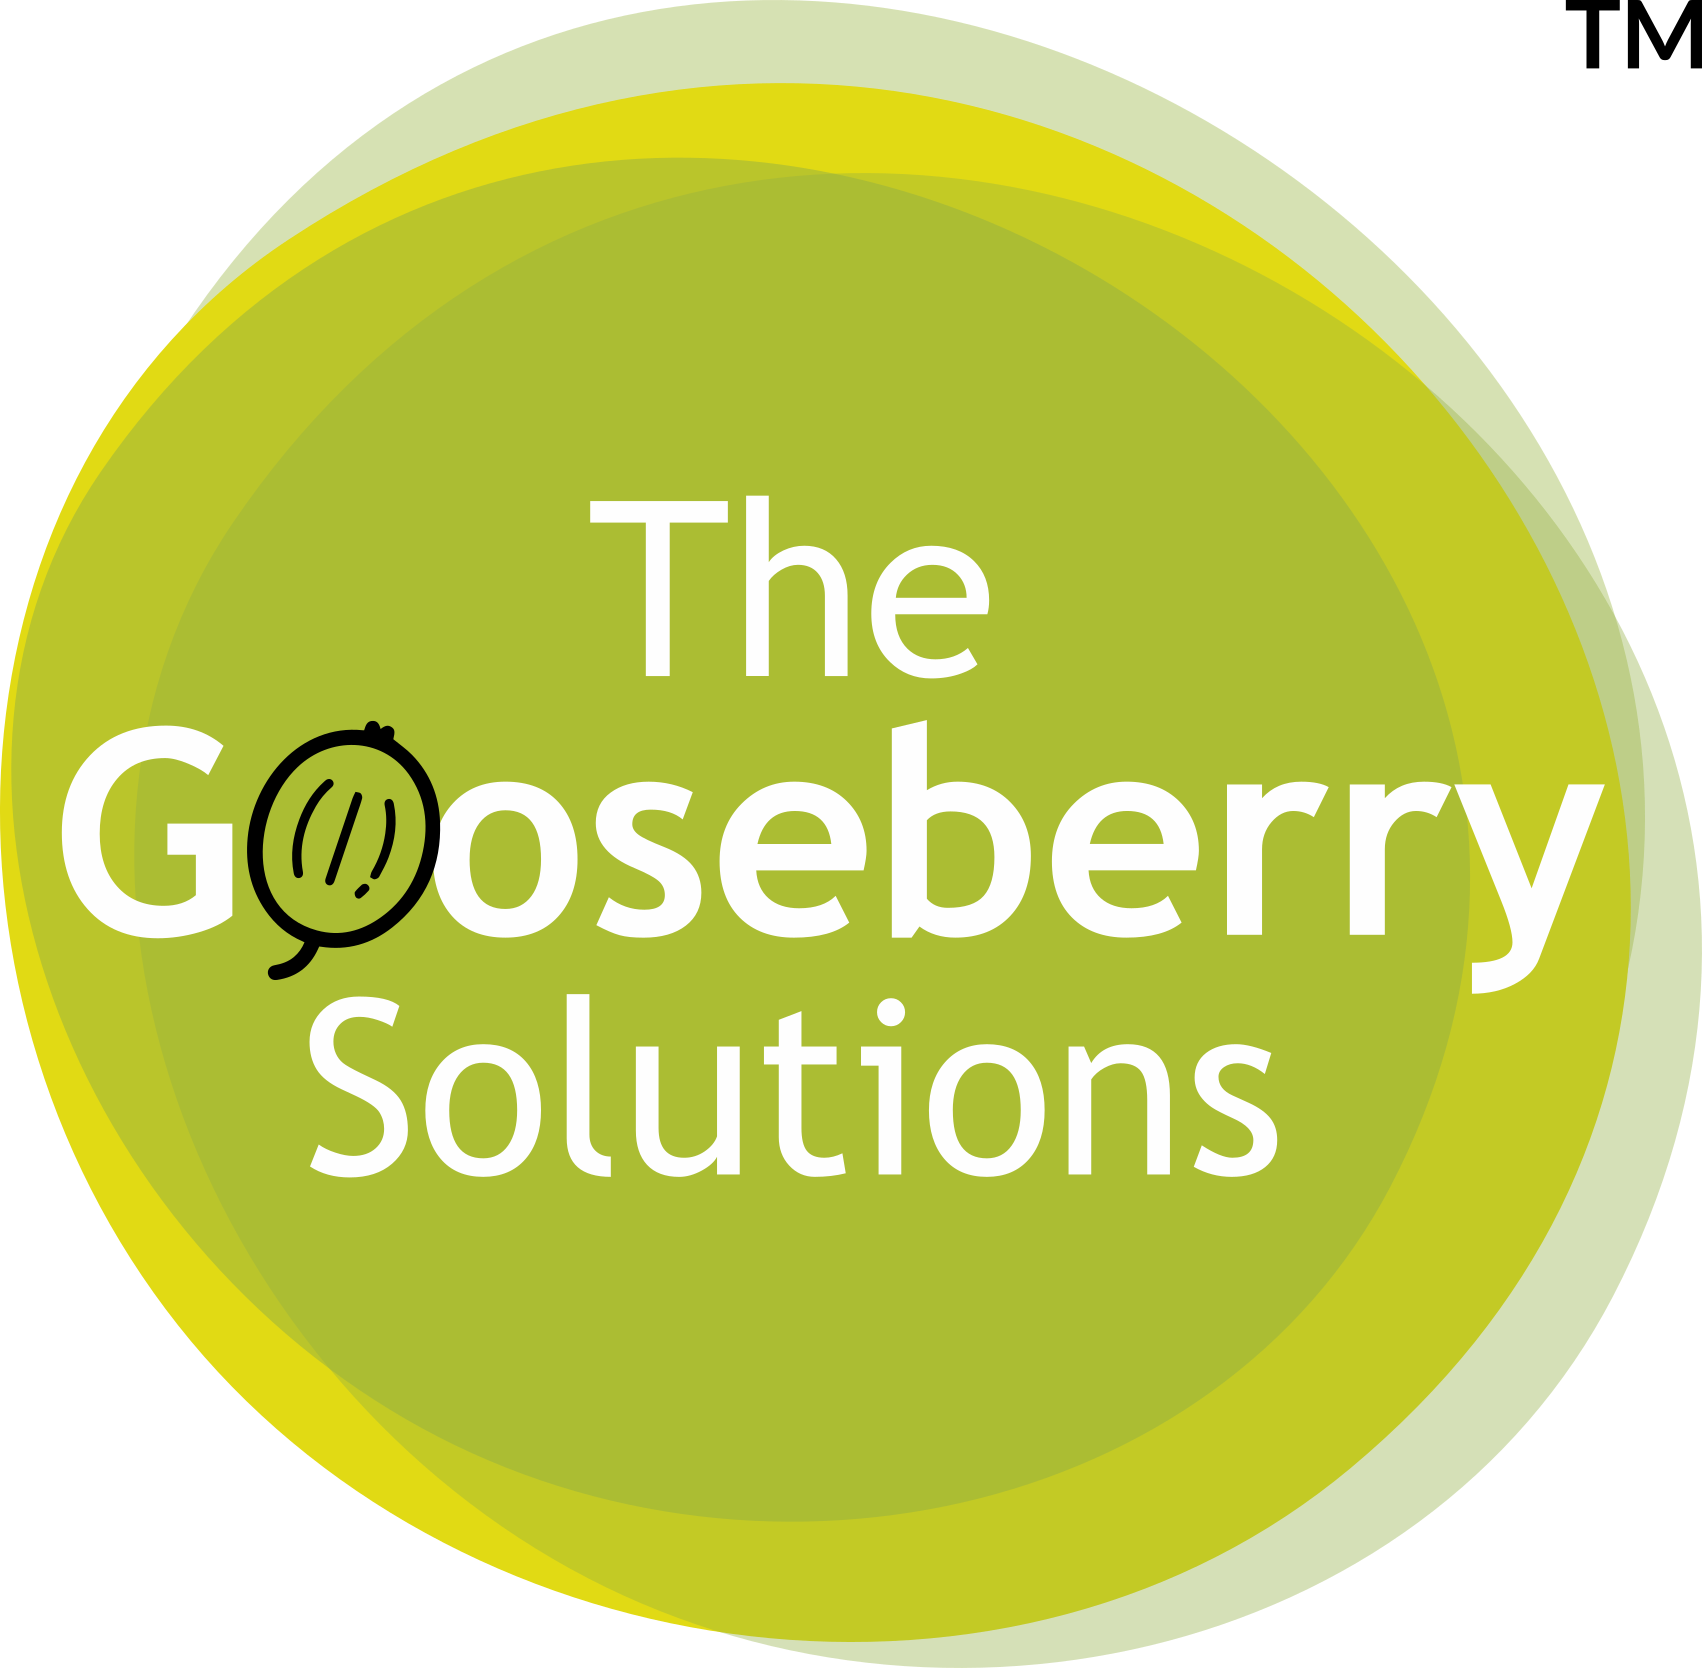 The Gooseberry Solutions